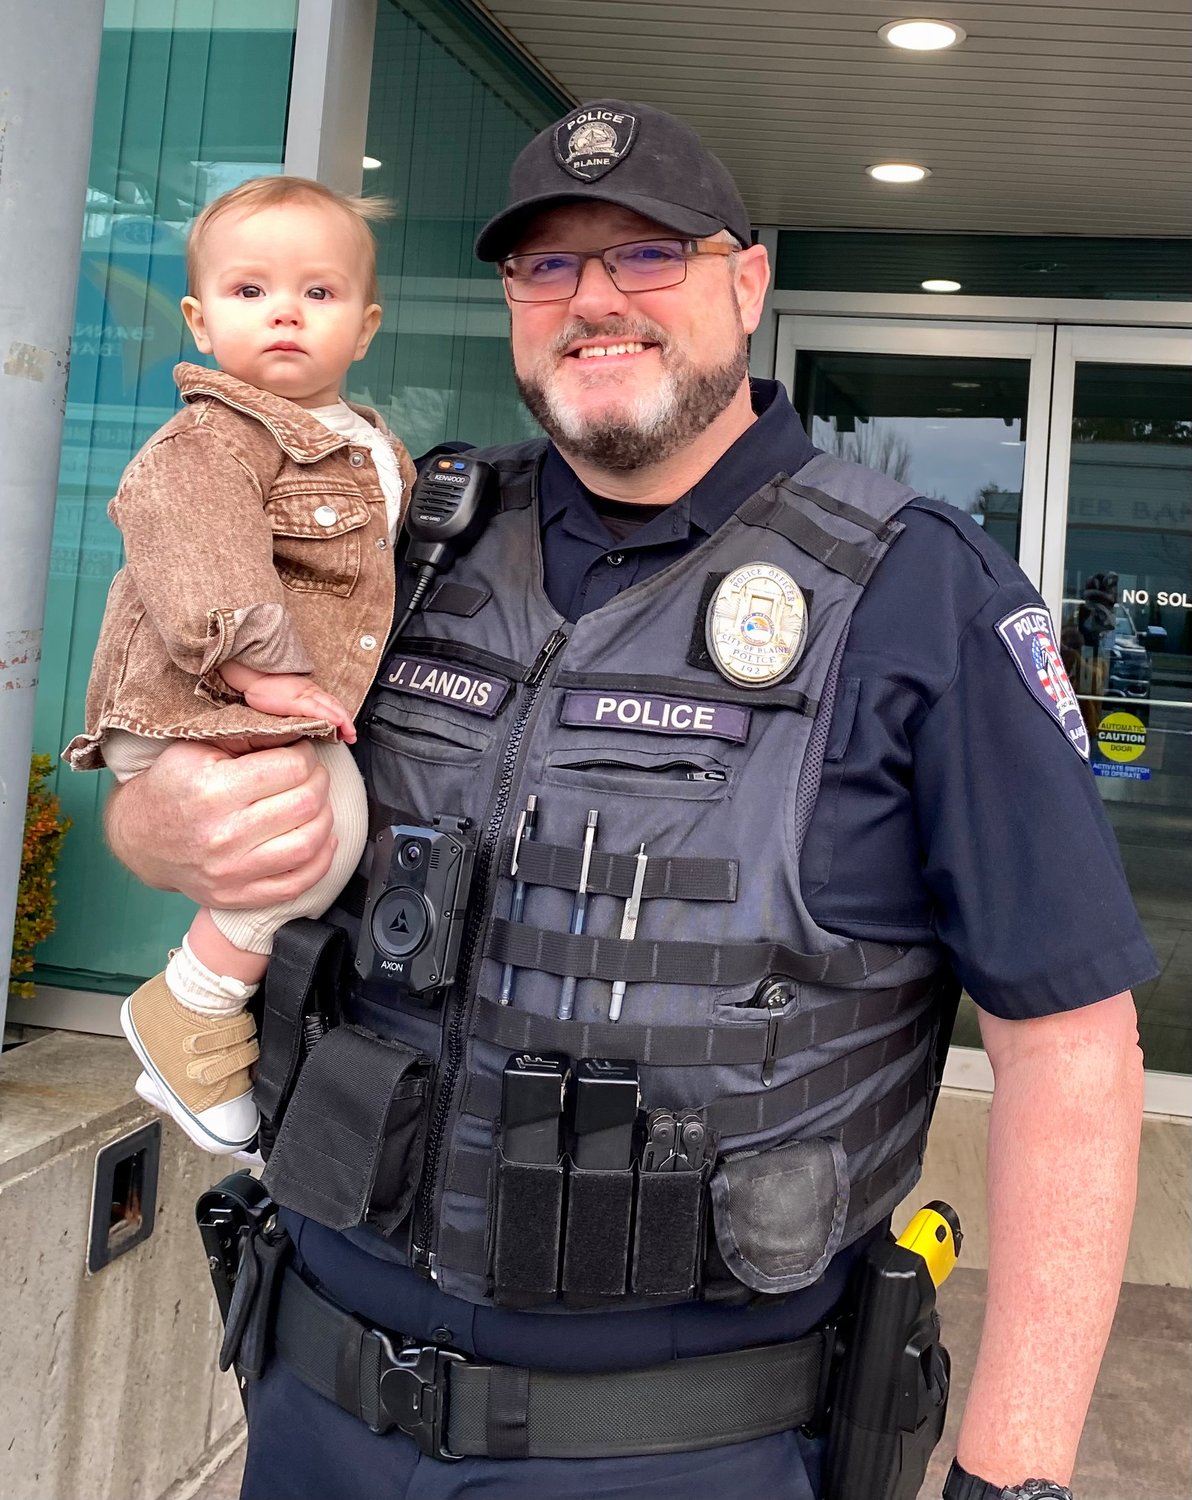 Blaine Police Department officer Jon Landis with his grandson Arlo in 2022.